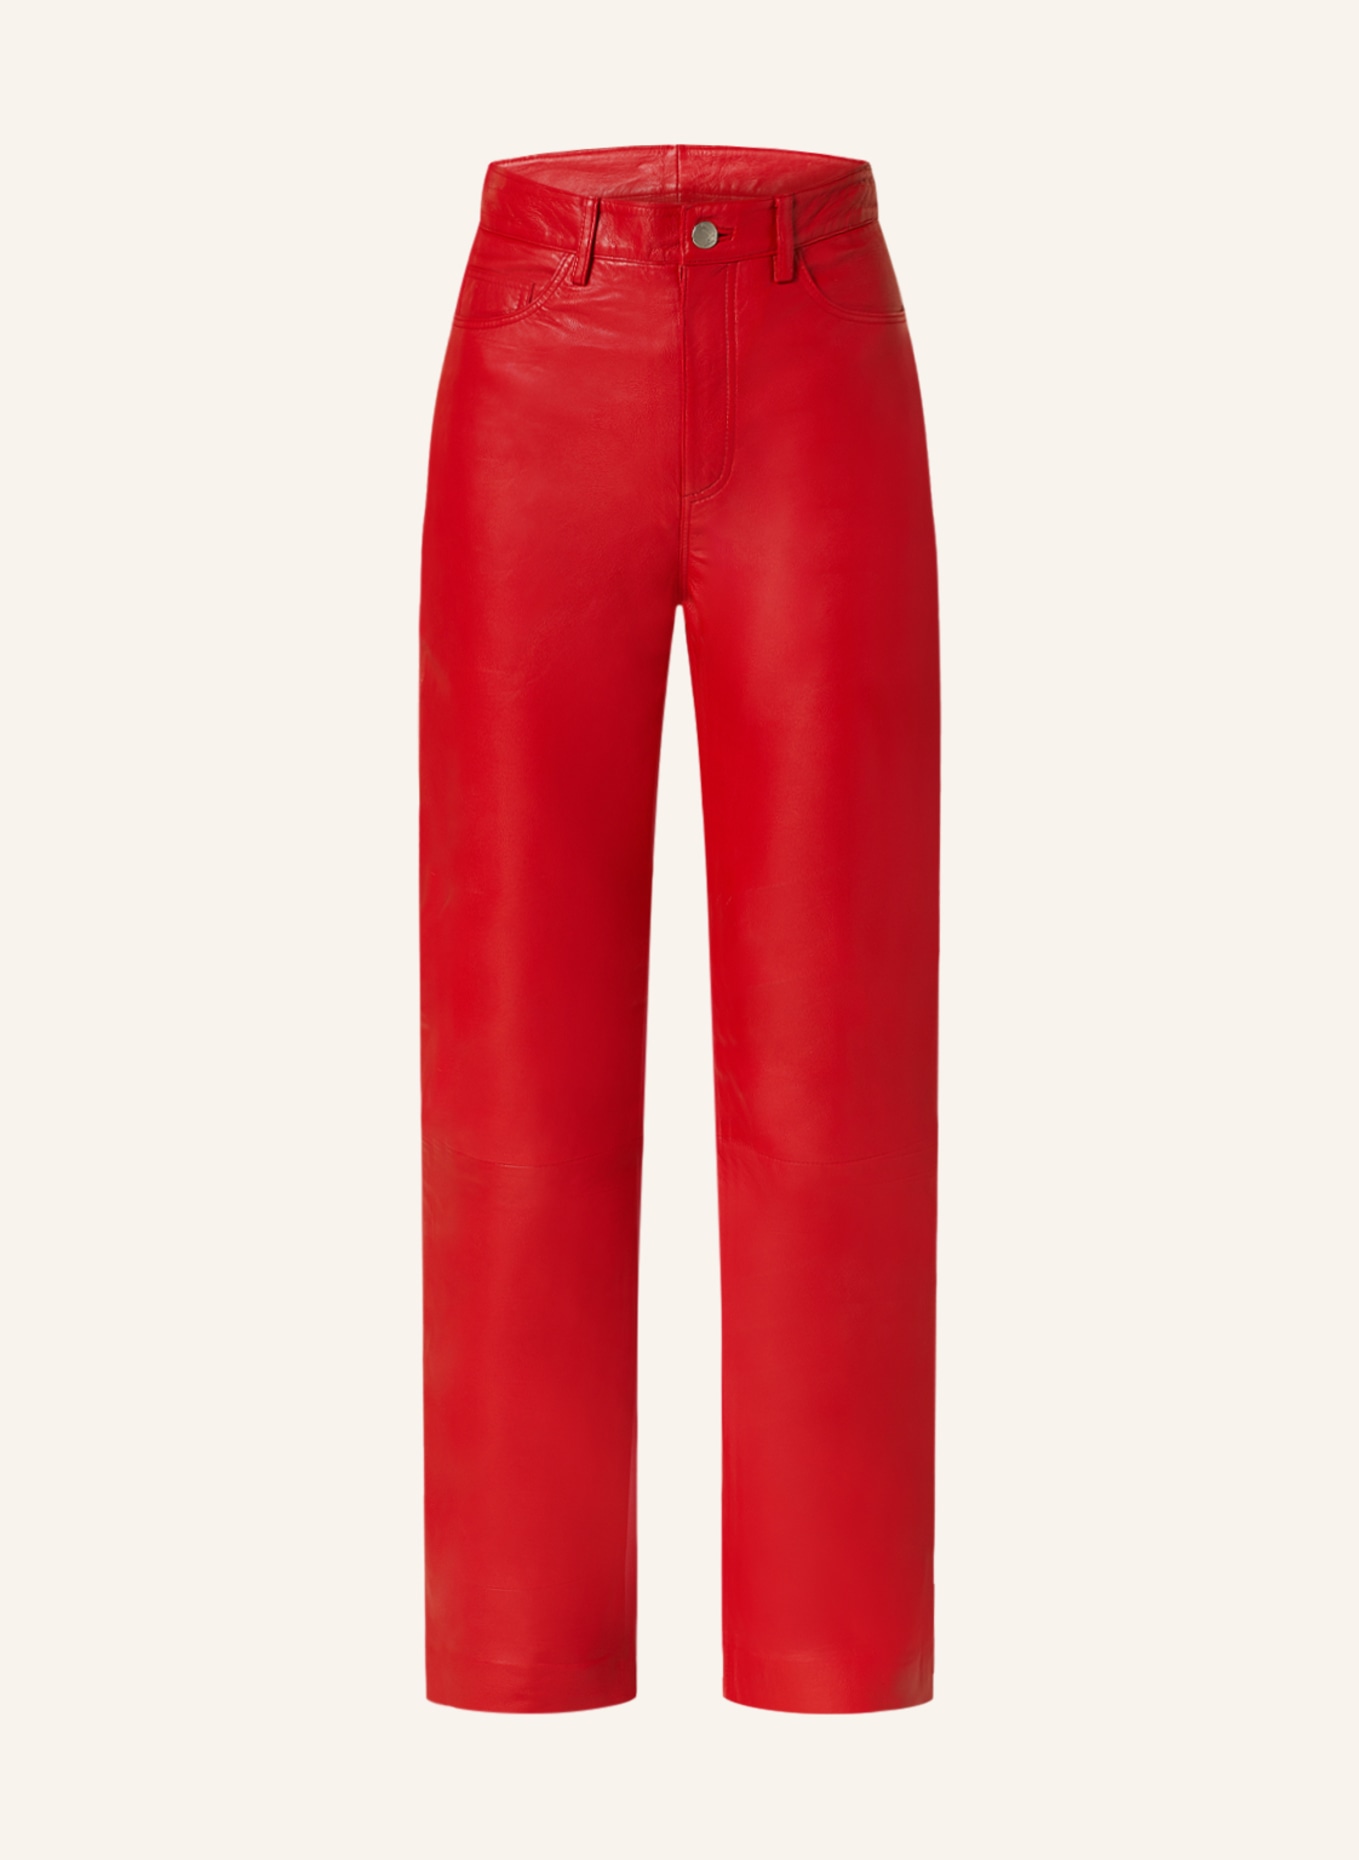 Red Leather Pants  Genuine leather Red Pants